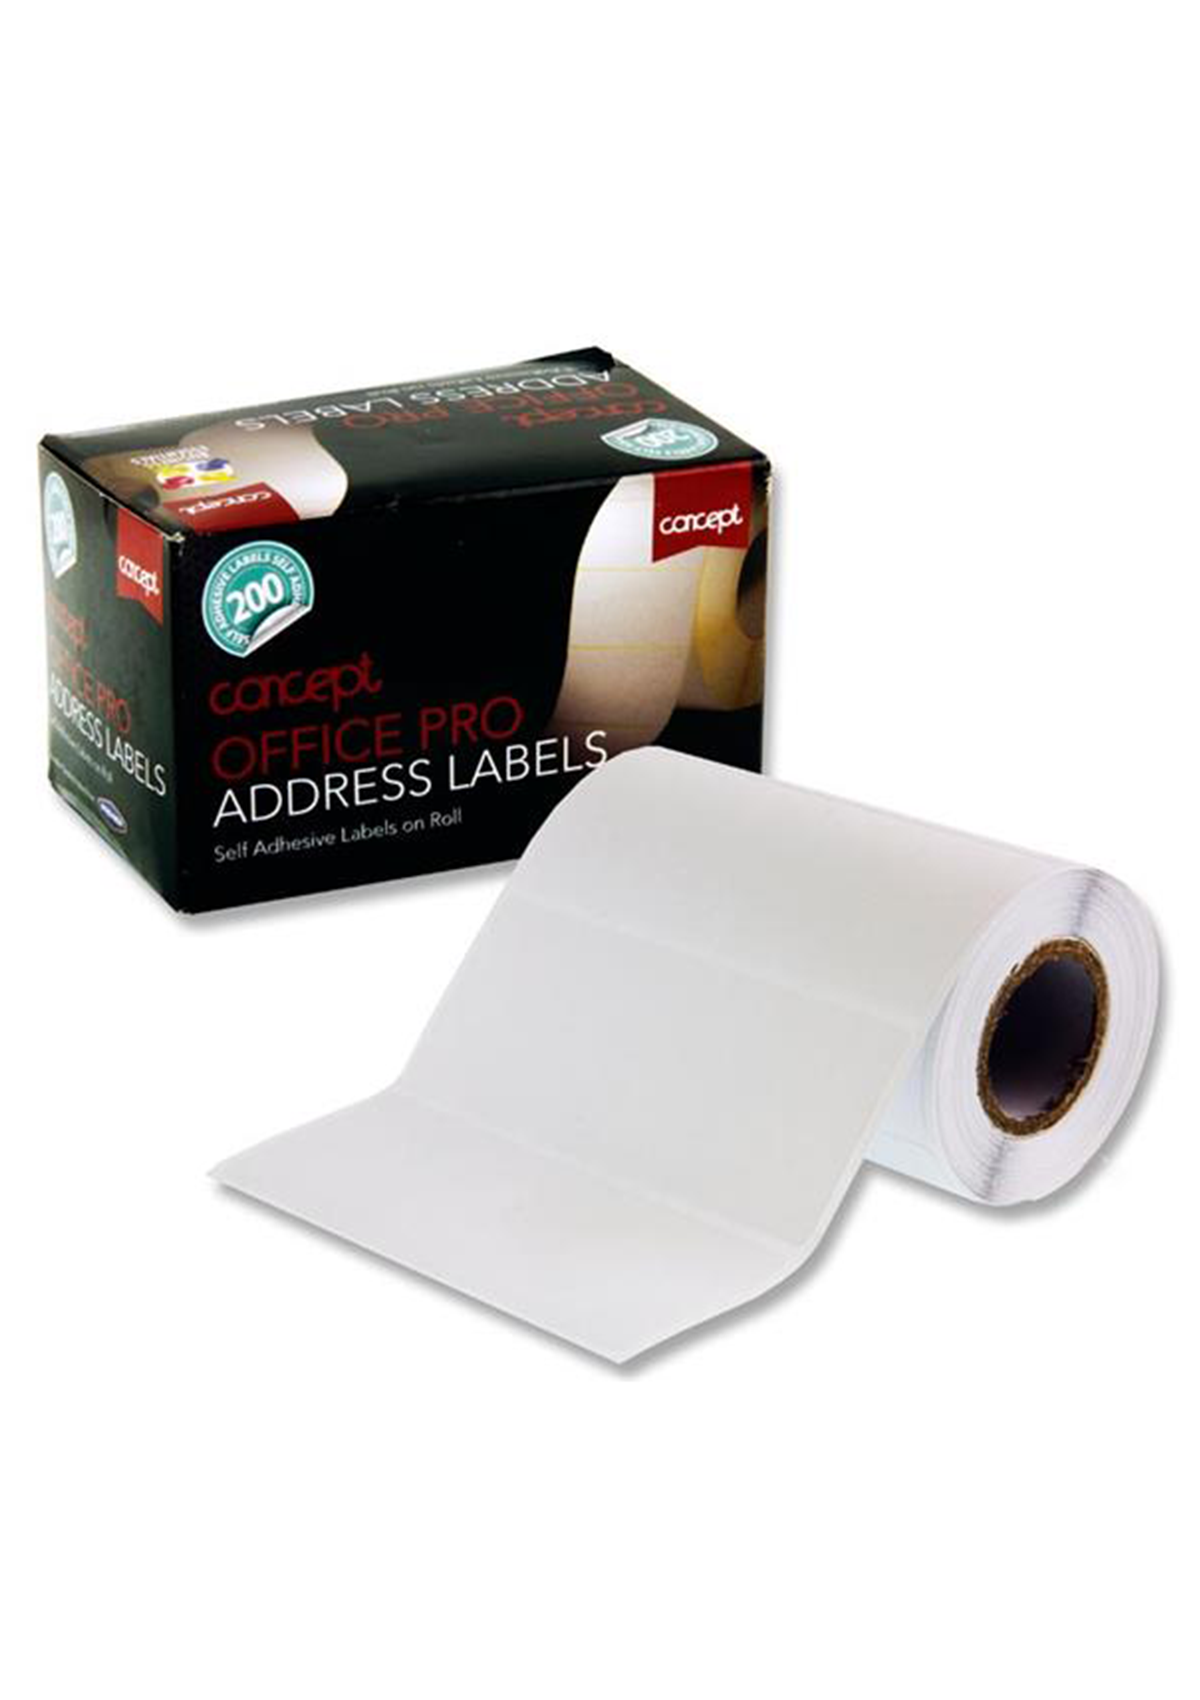 Roll 200 Self Adhesive White Address Labels